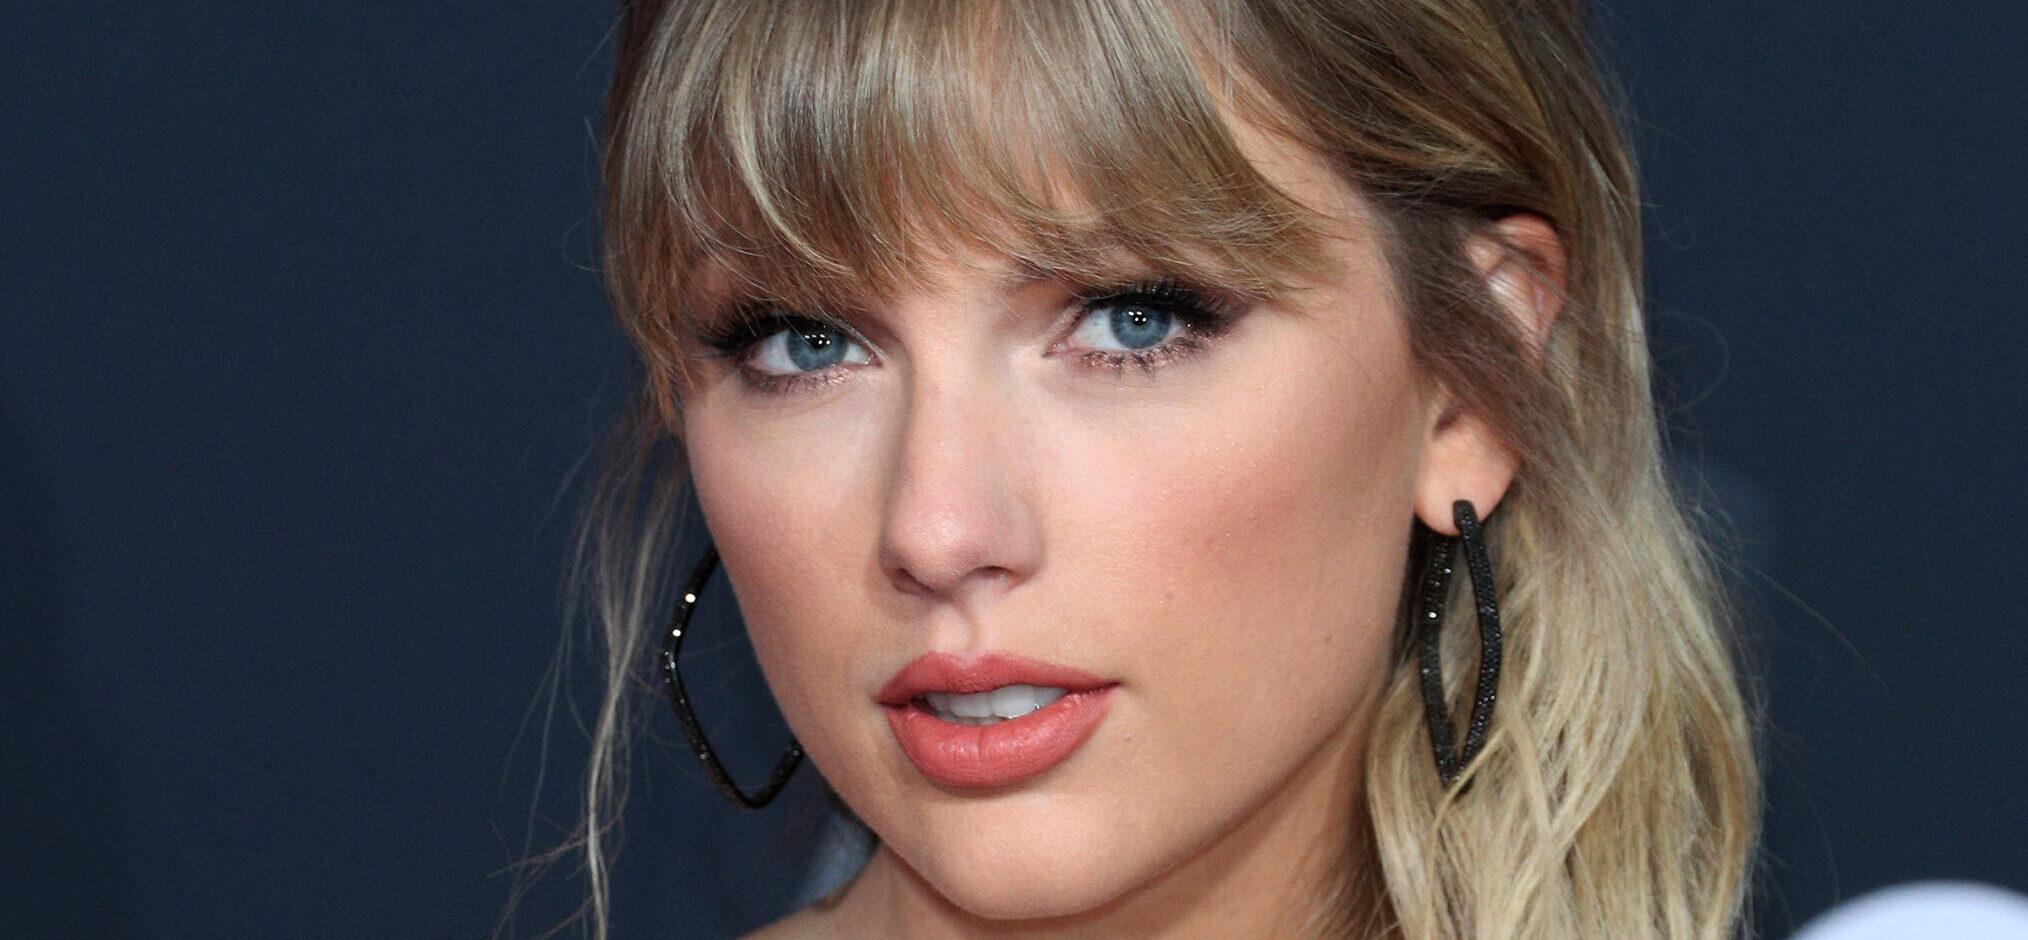 Taylor Swift's Massive Earnings From Spotify Revealed